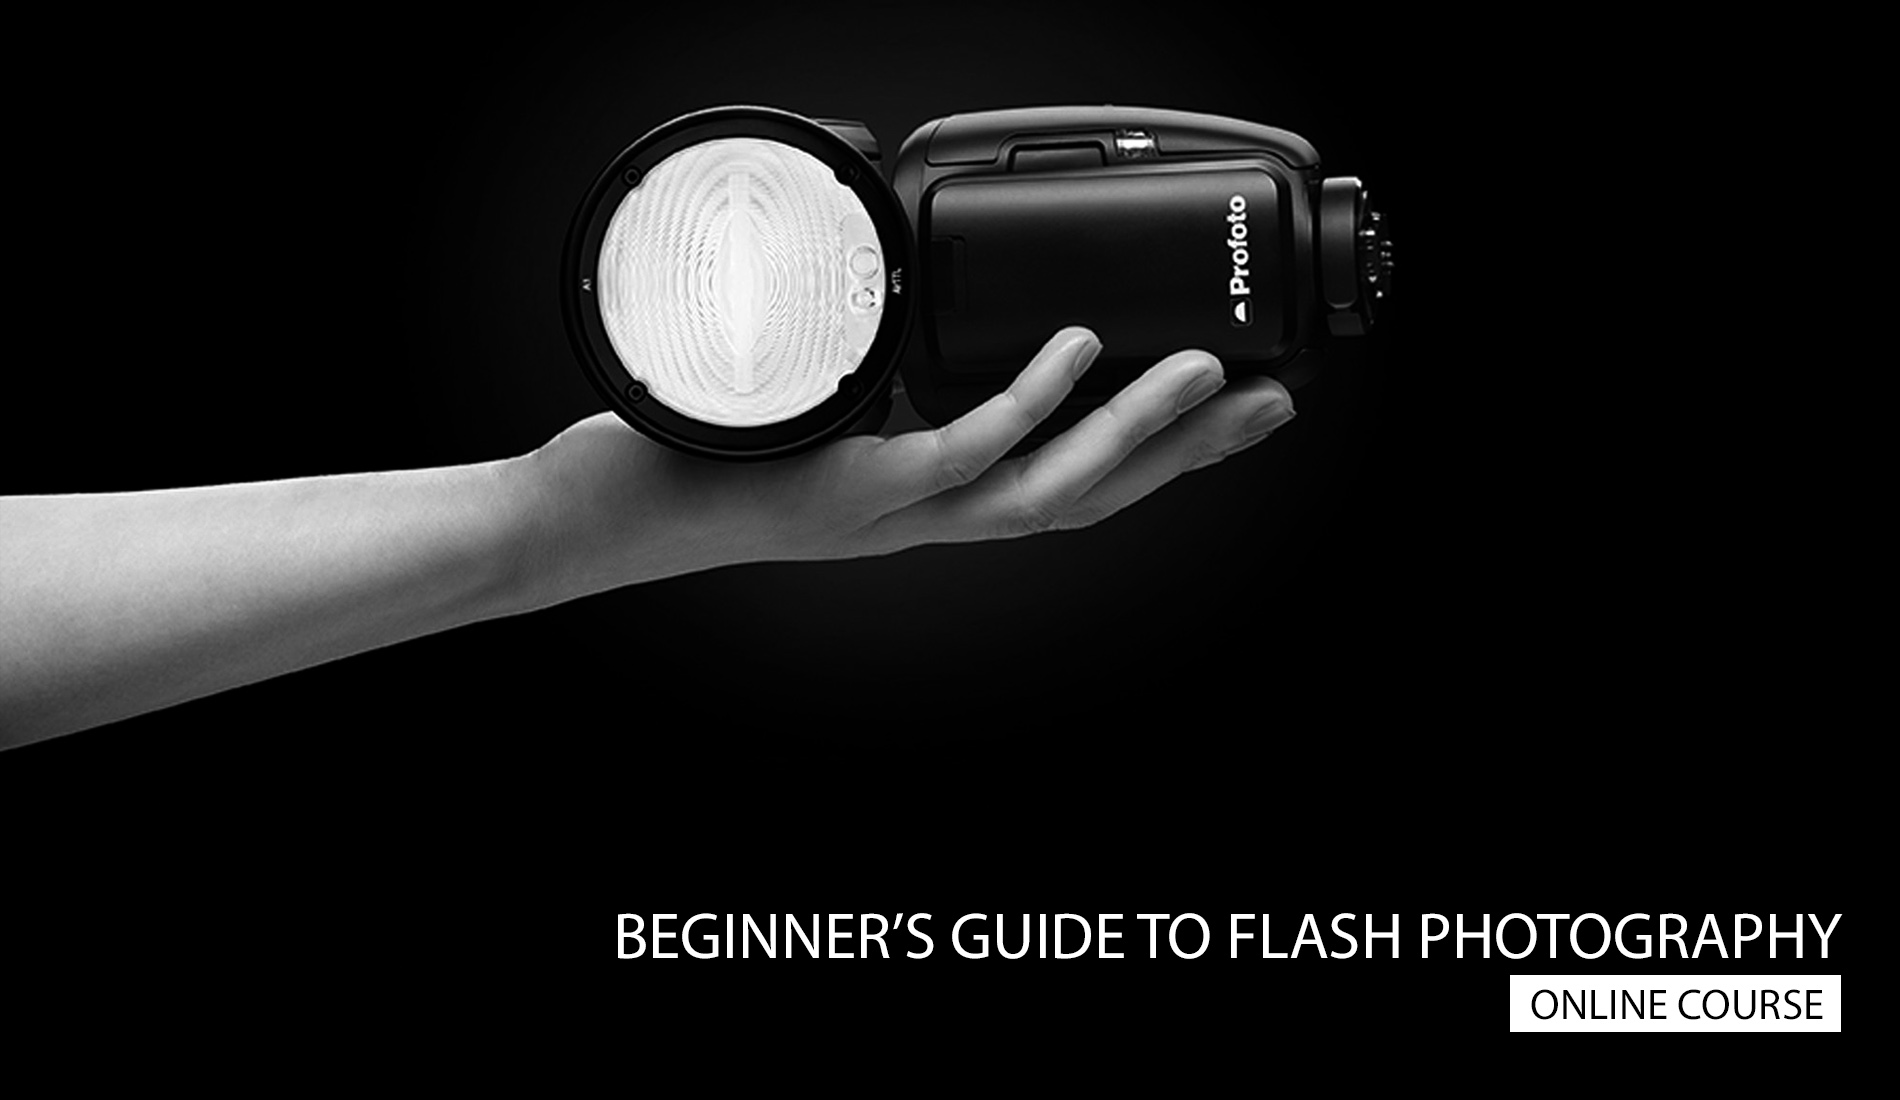 Online flash photography course